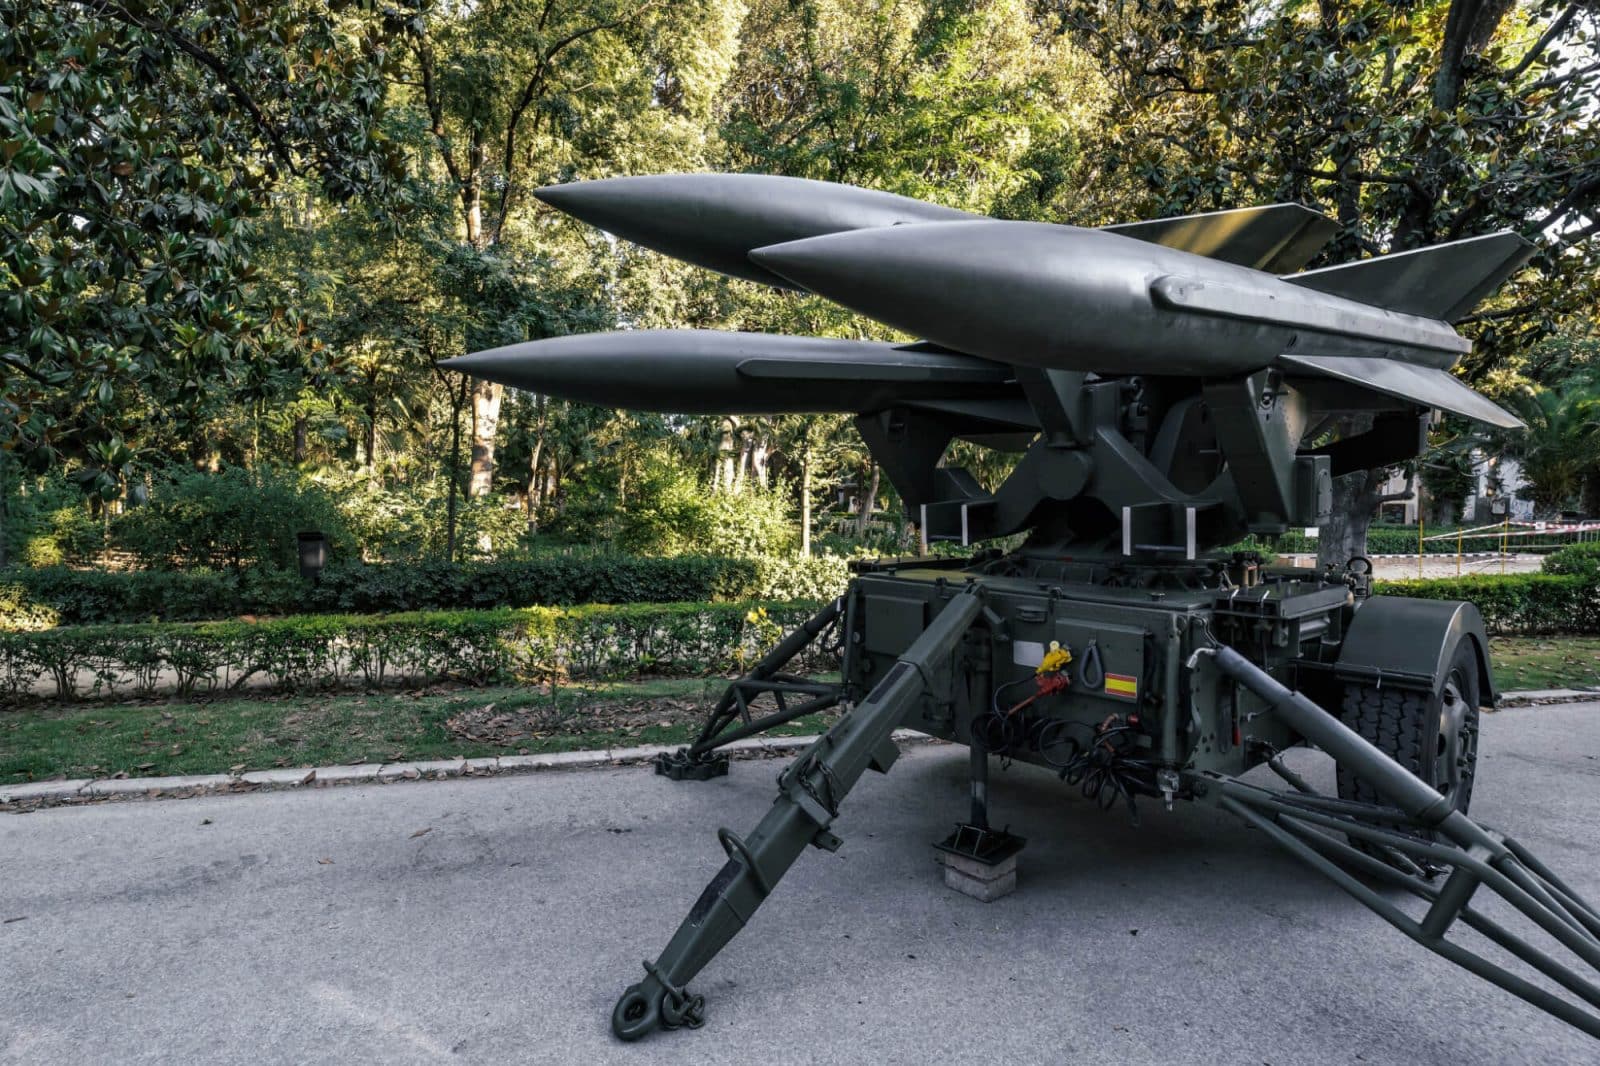 Ukraine received the first “Hawk” air defense systems from Spain